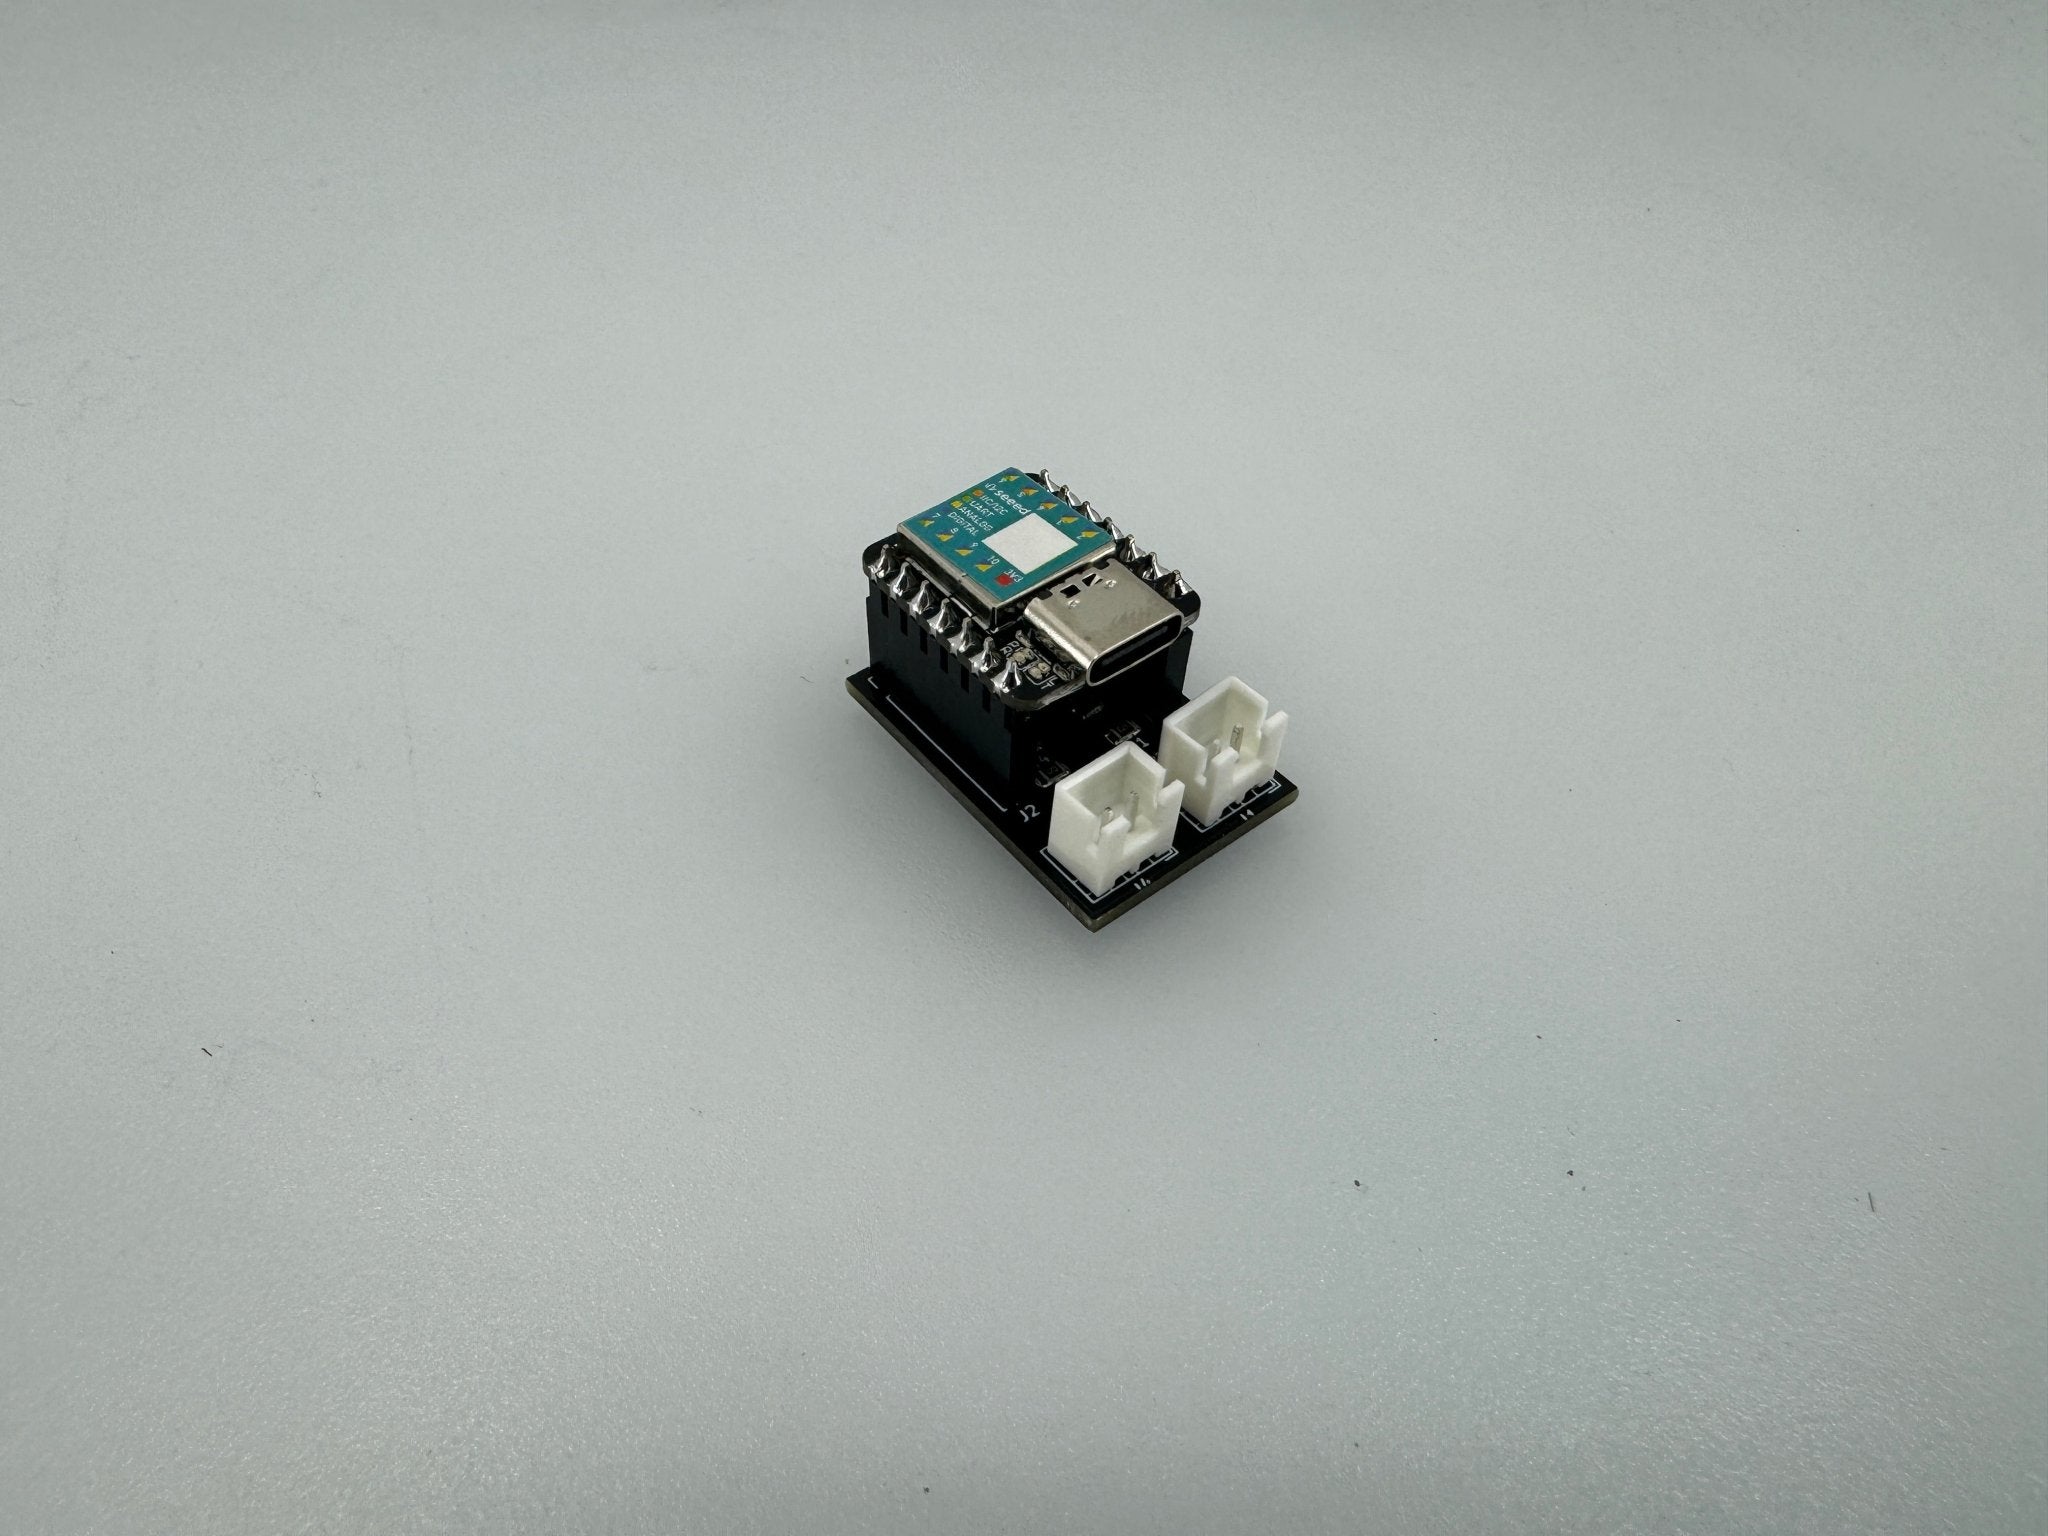 One more Stupid Thermistor PCB by CBC02009 (SMD Thermistor Expander Board) - West3D 3D Printing Supplies - XR Bunker